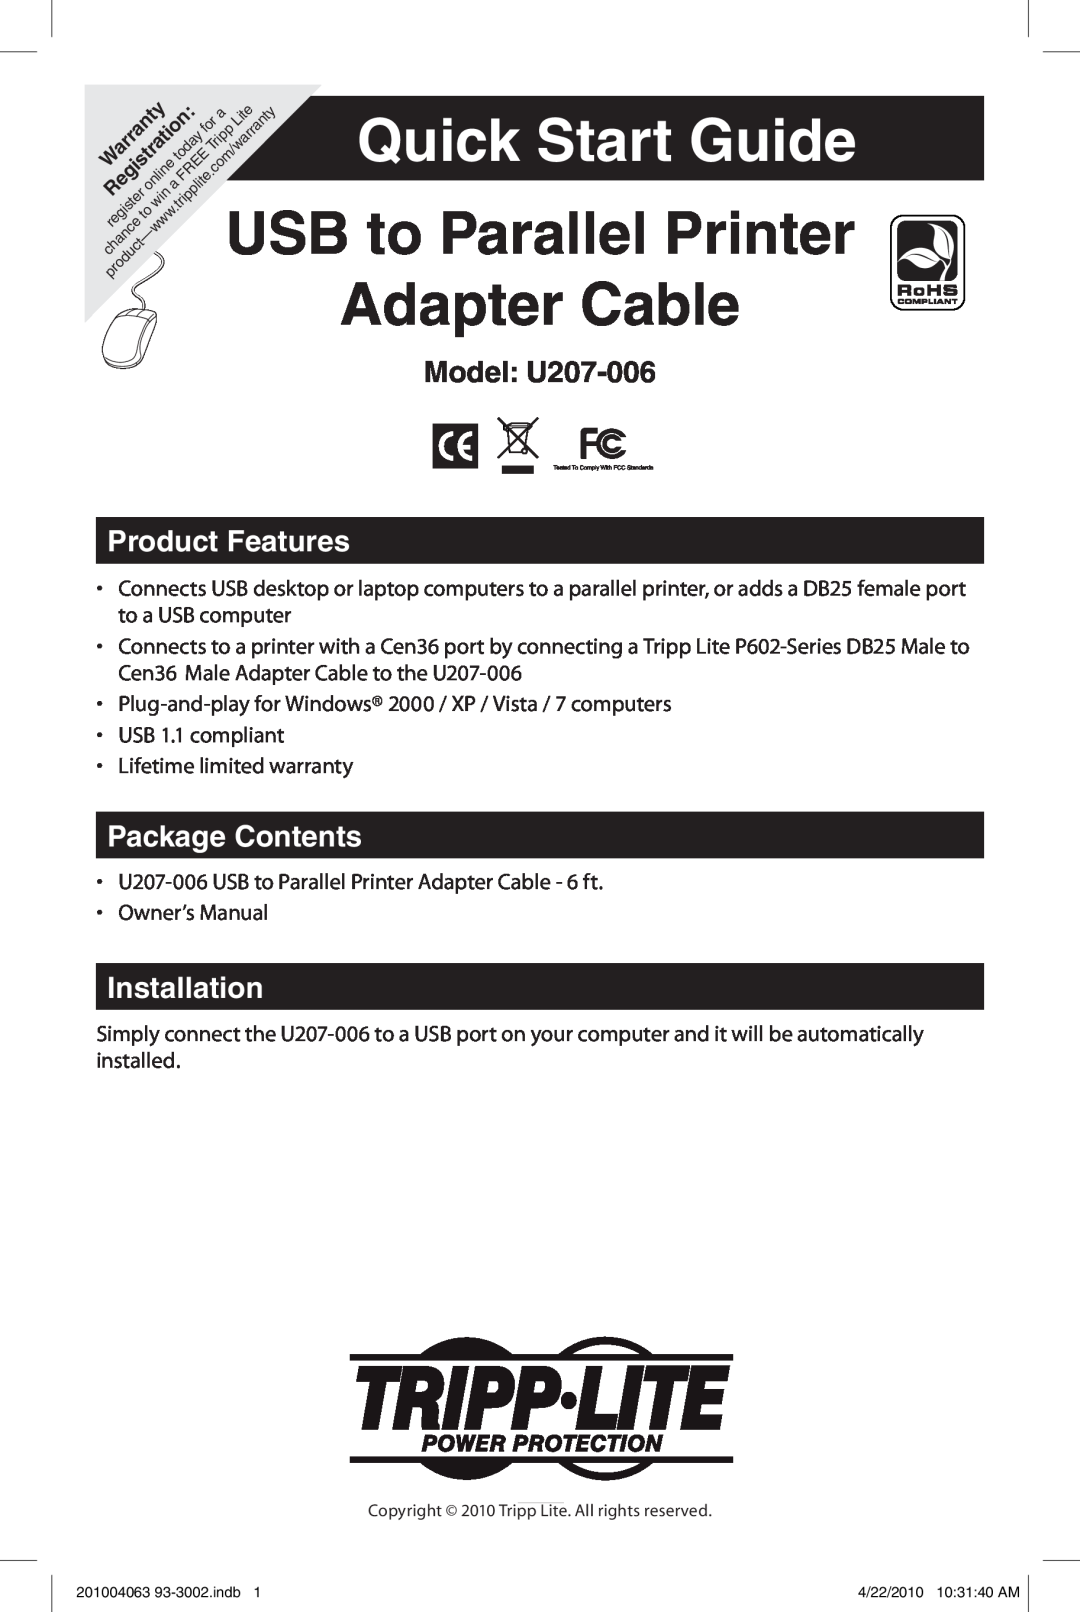 Tripp Lite quick start USB to Parallel Printer, Adapter Cable, Model U207-006, Product Features, Package Contents 